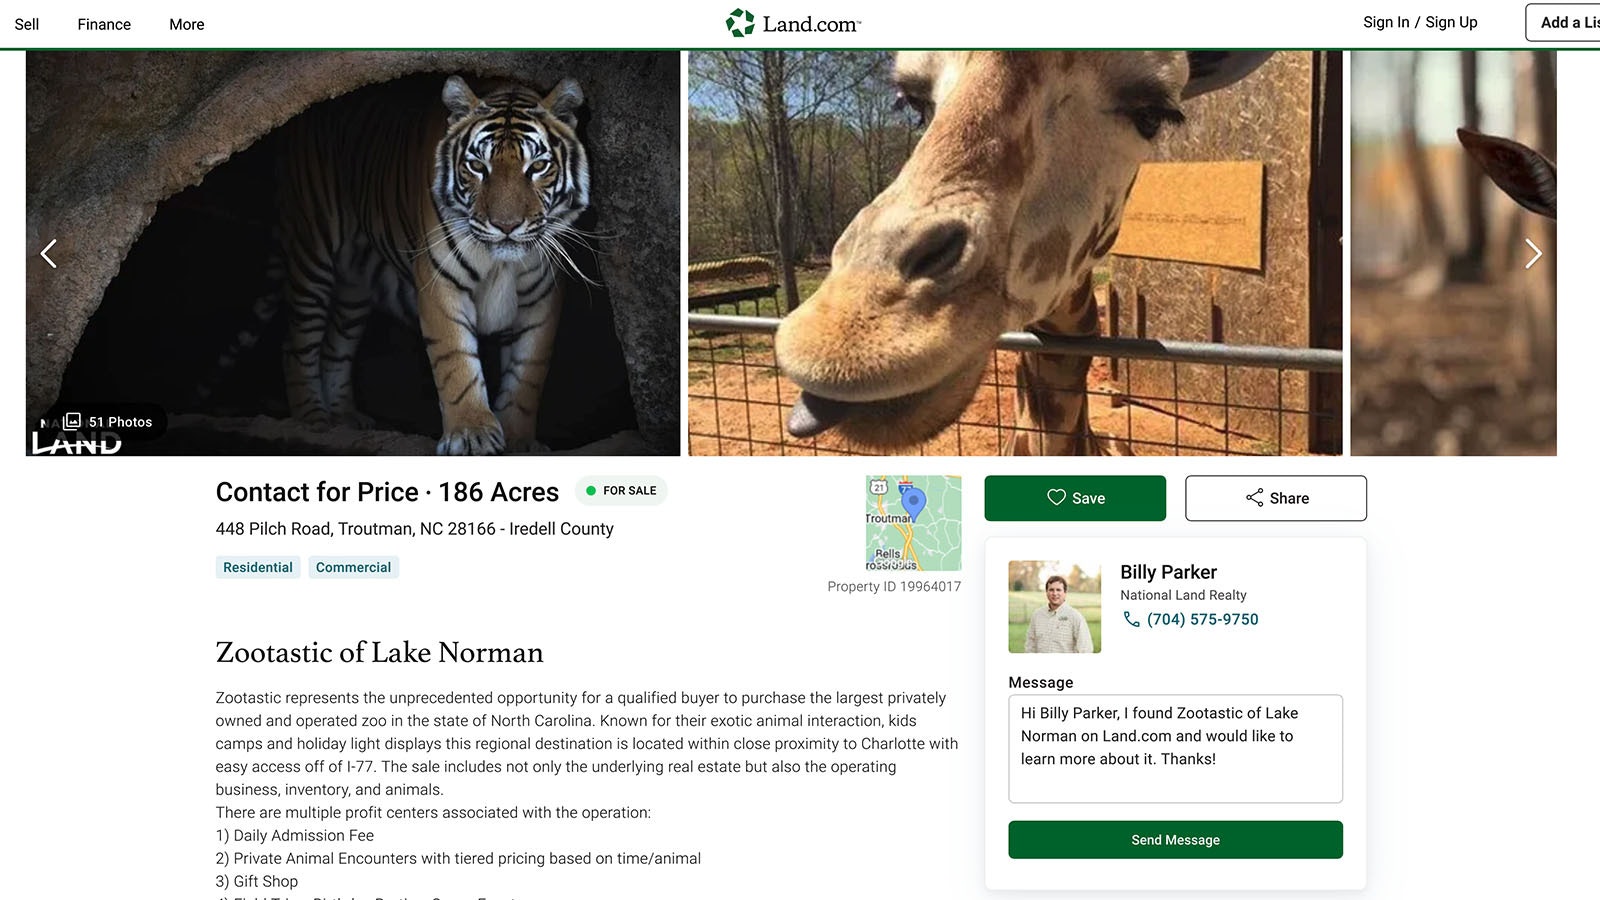 Zooastic of Lake Norman is a 186-acre zoo complex for sale in North Carolina.